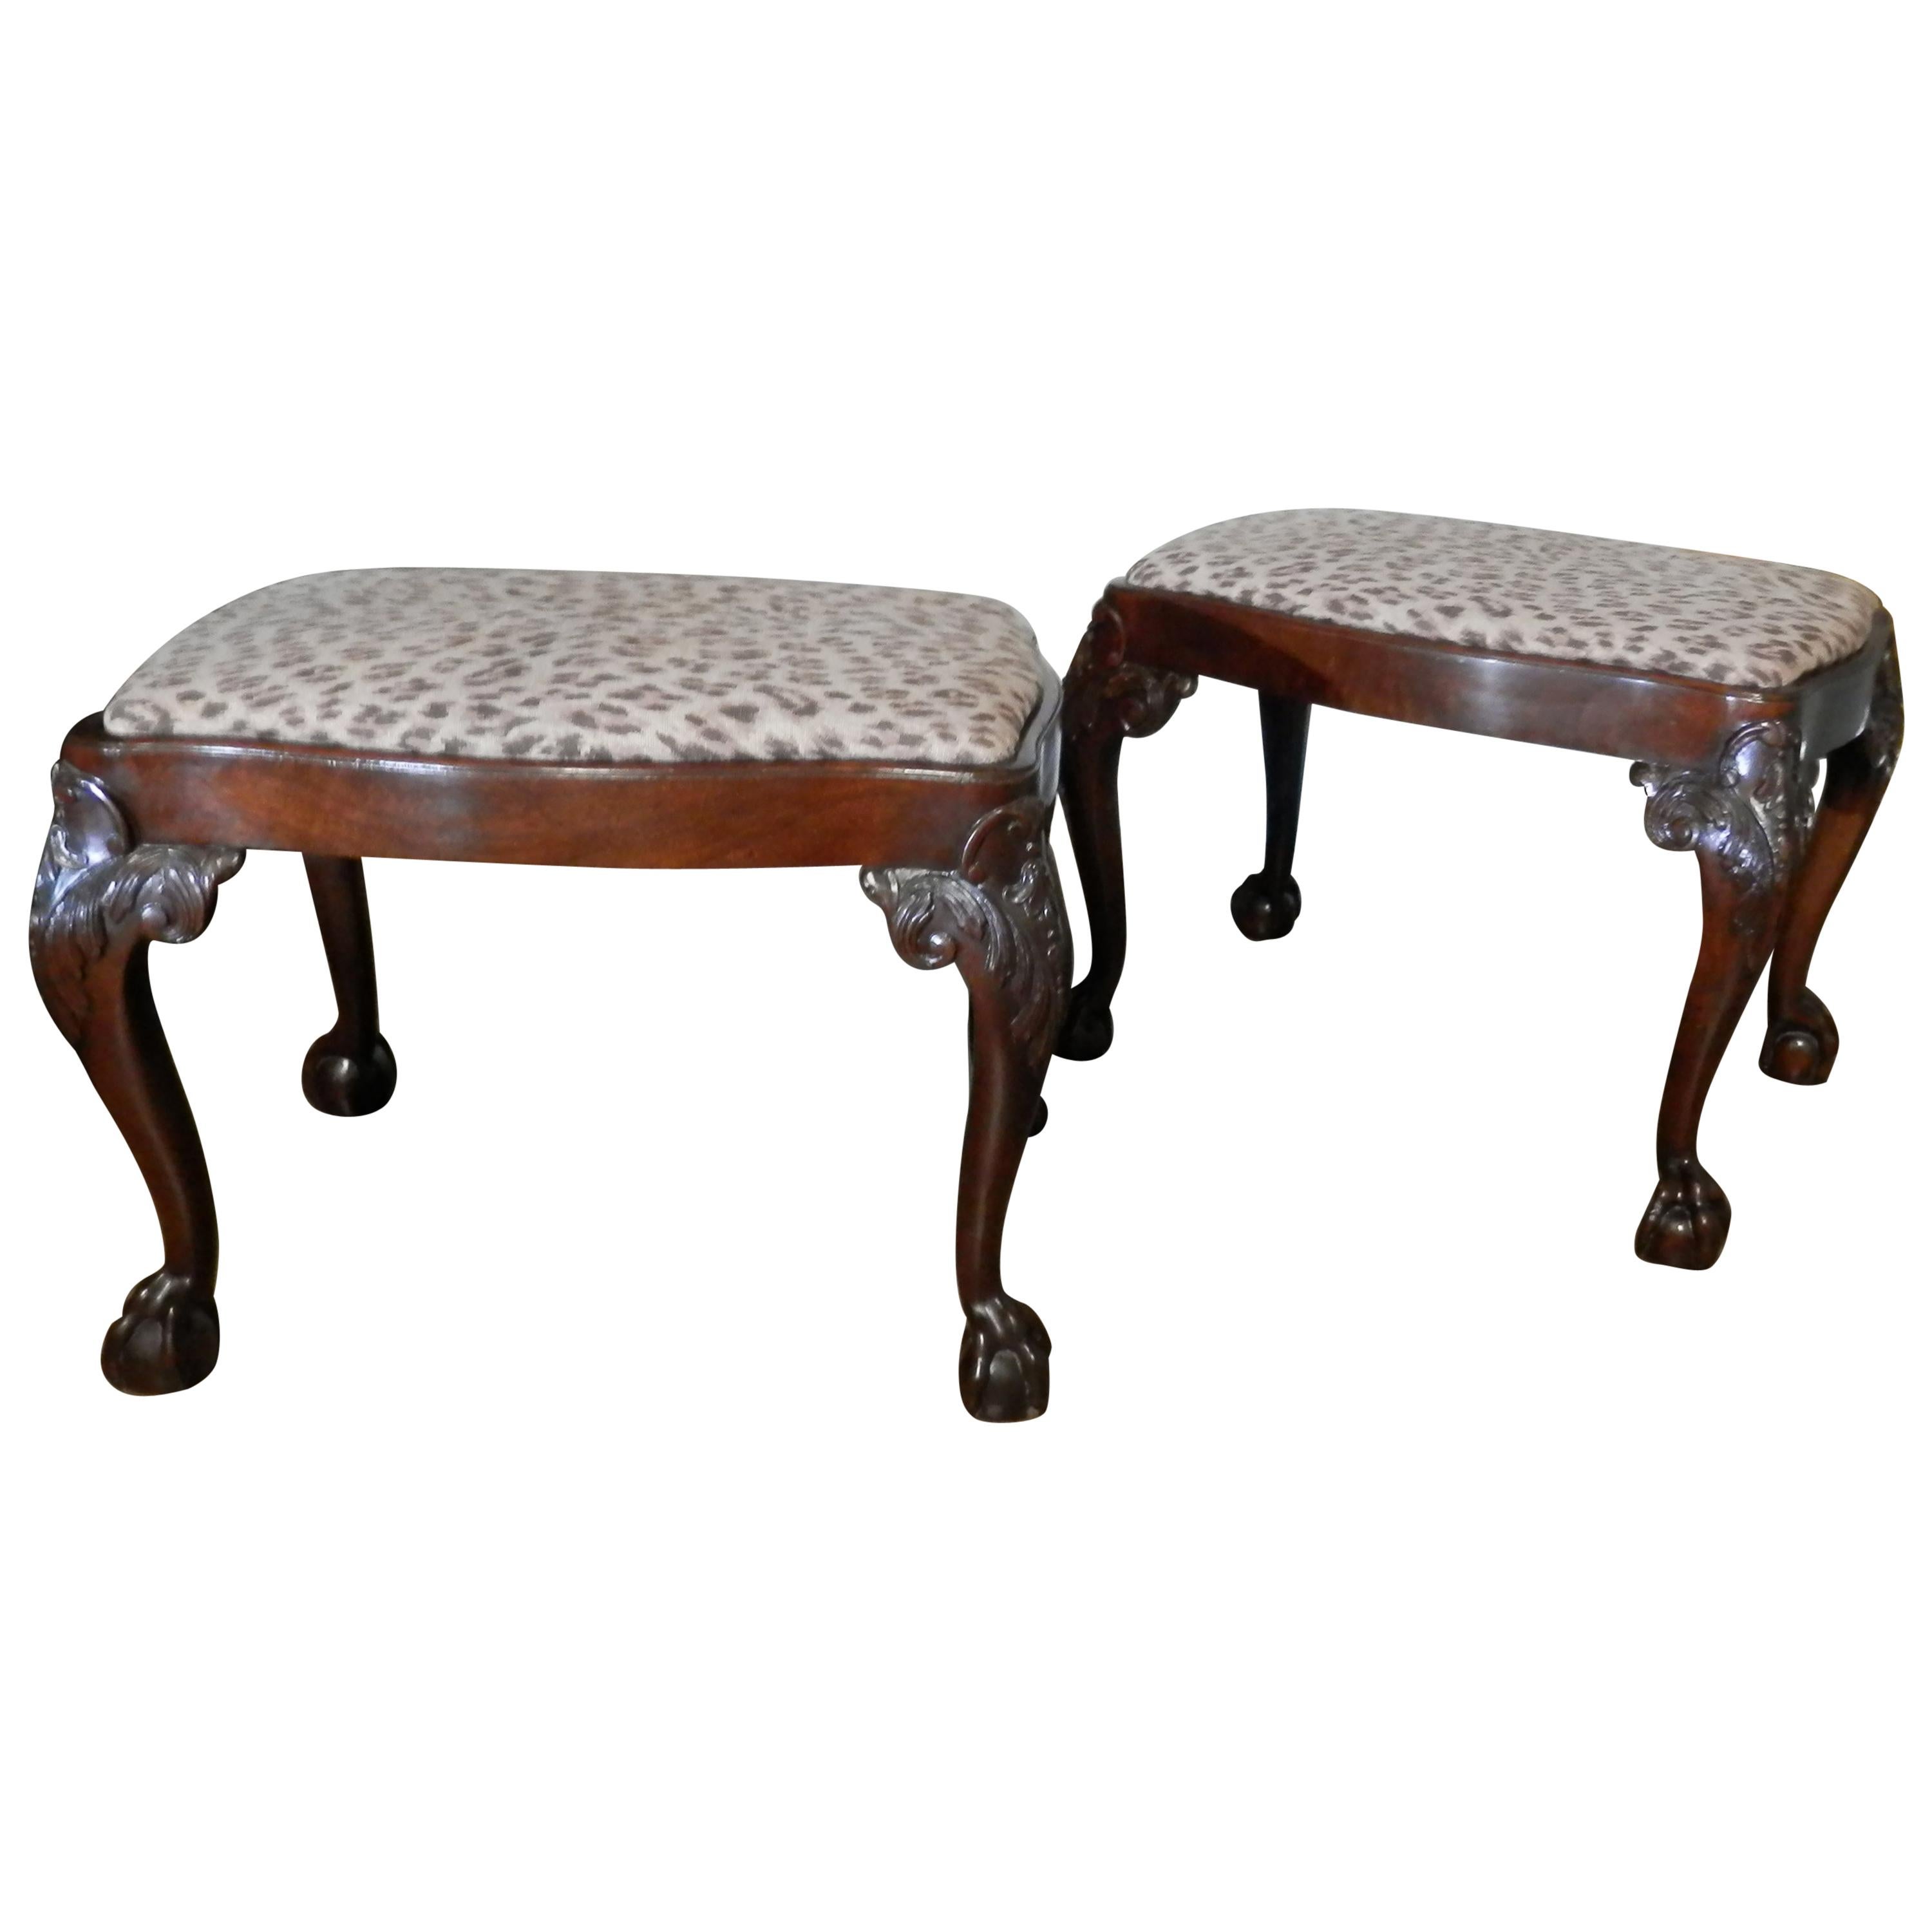 Pair of Late 19th Century English Chippendale Mahogany Benches